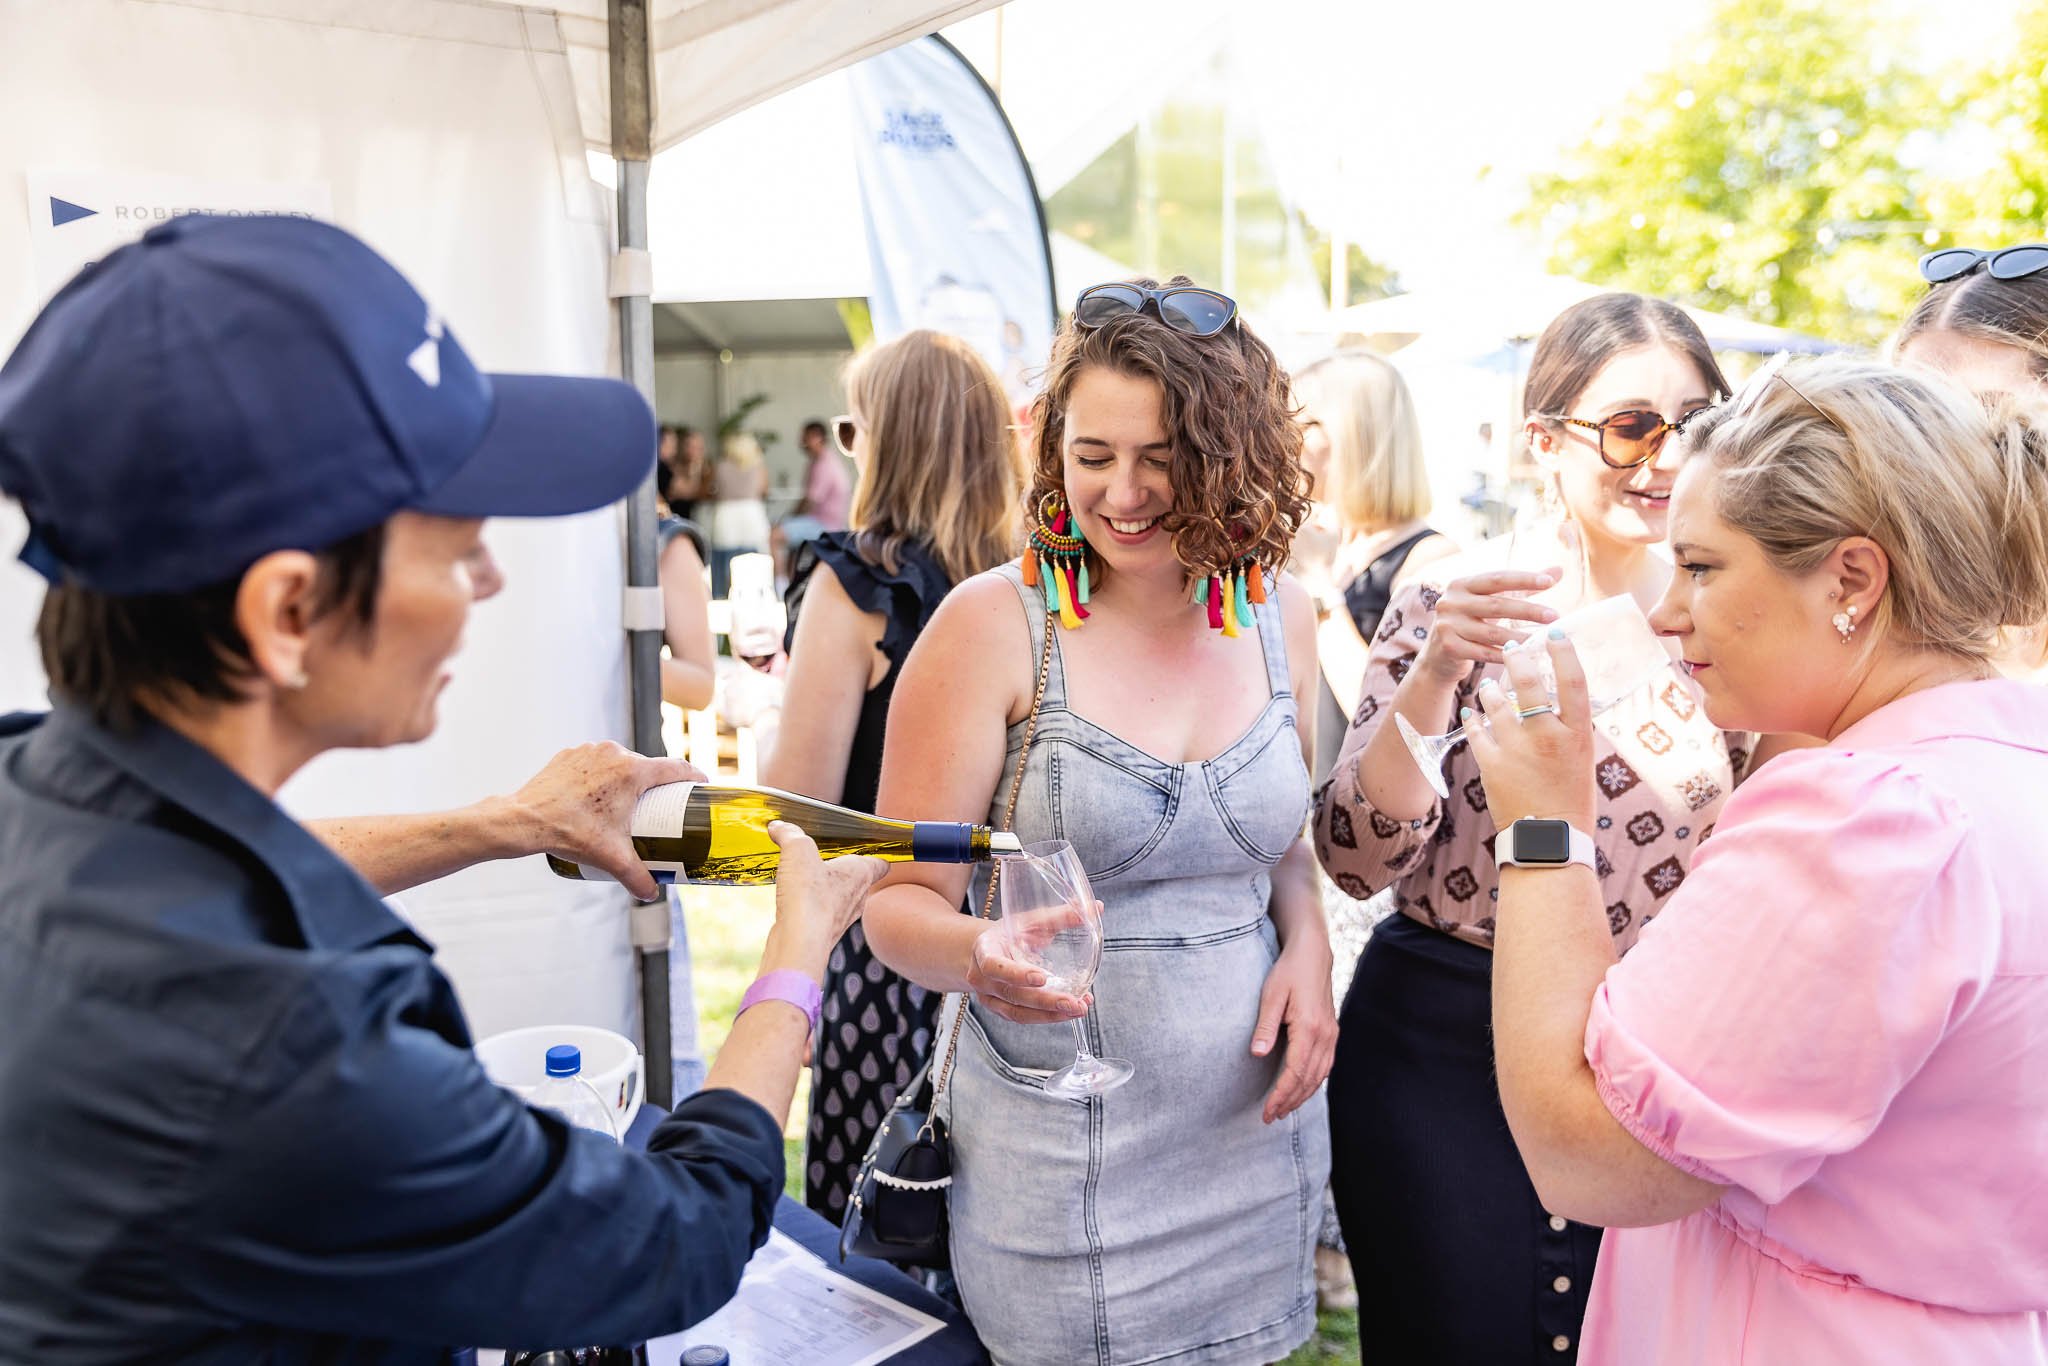 Ammon_Creative-Event_Photography-CMS_Events-UnWined_Subiaco-Image_14.jpg